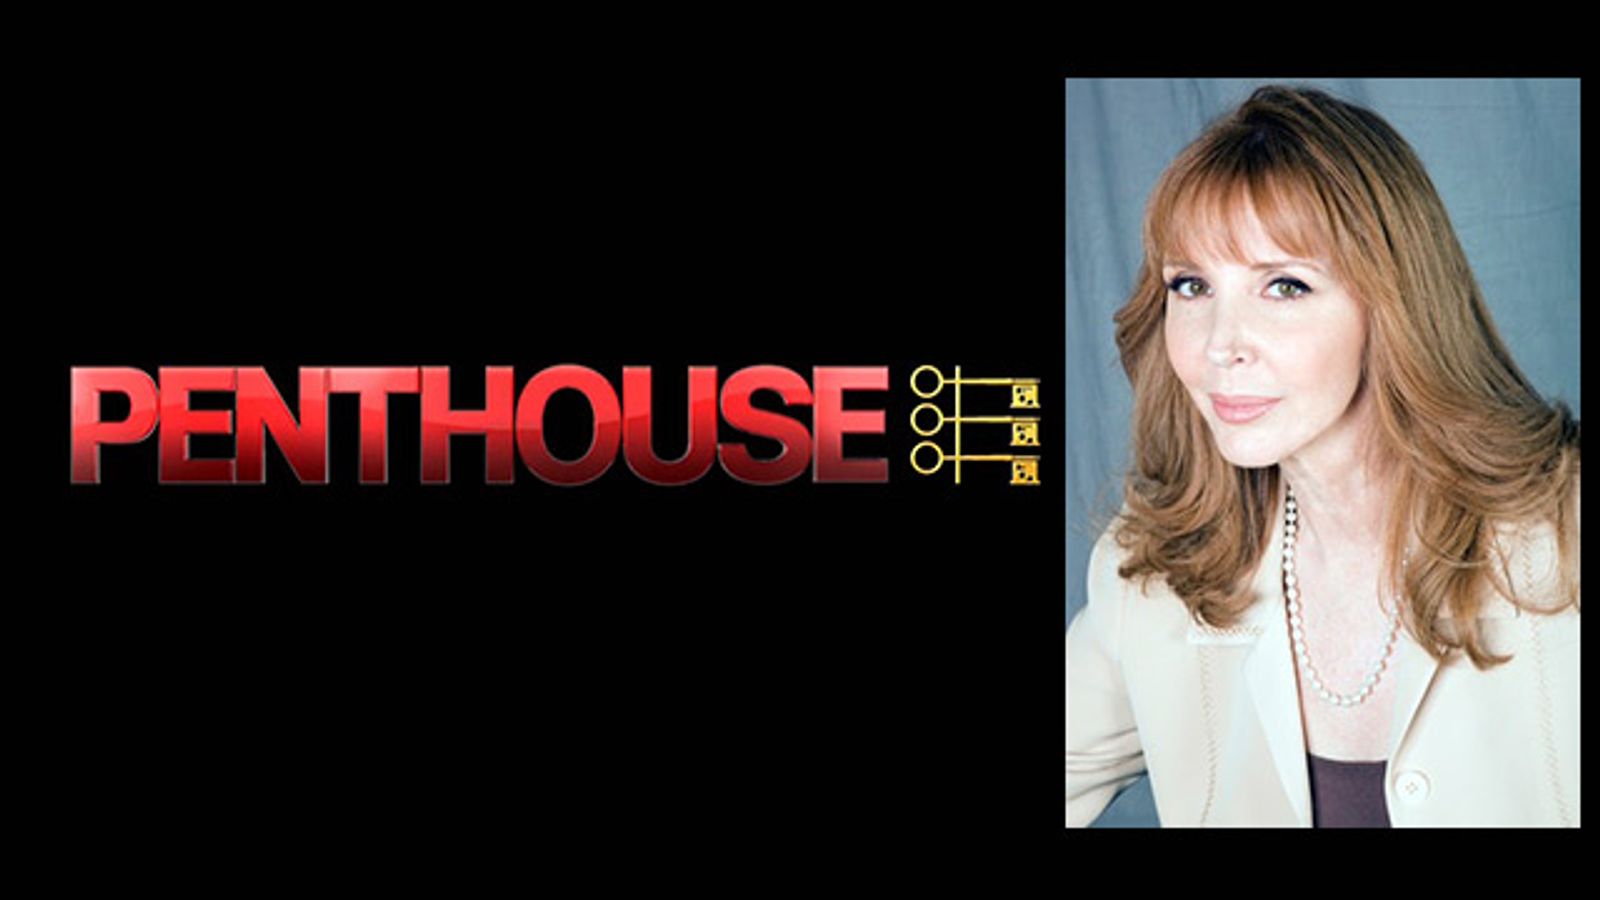 Penthouse Global Media Acquires Penthouse Mag, All TM'd Assets